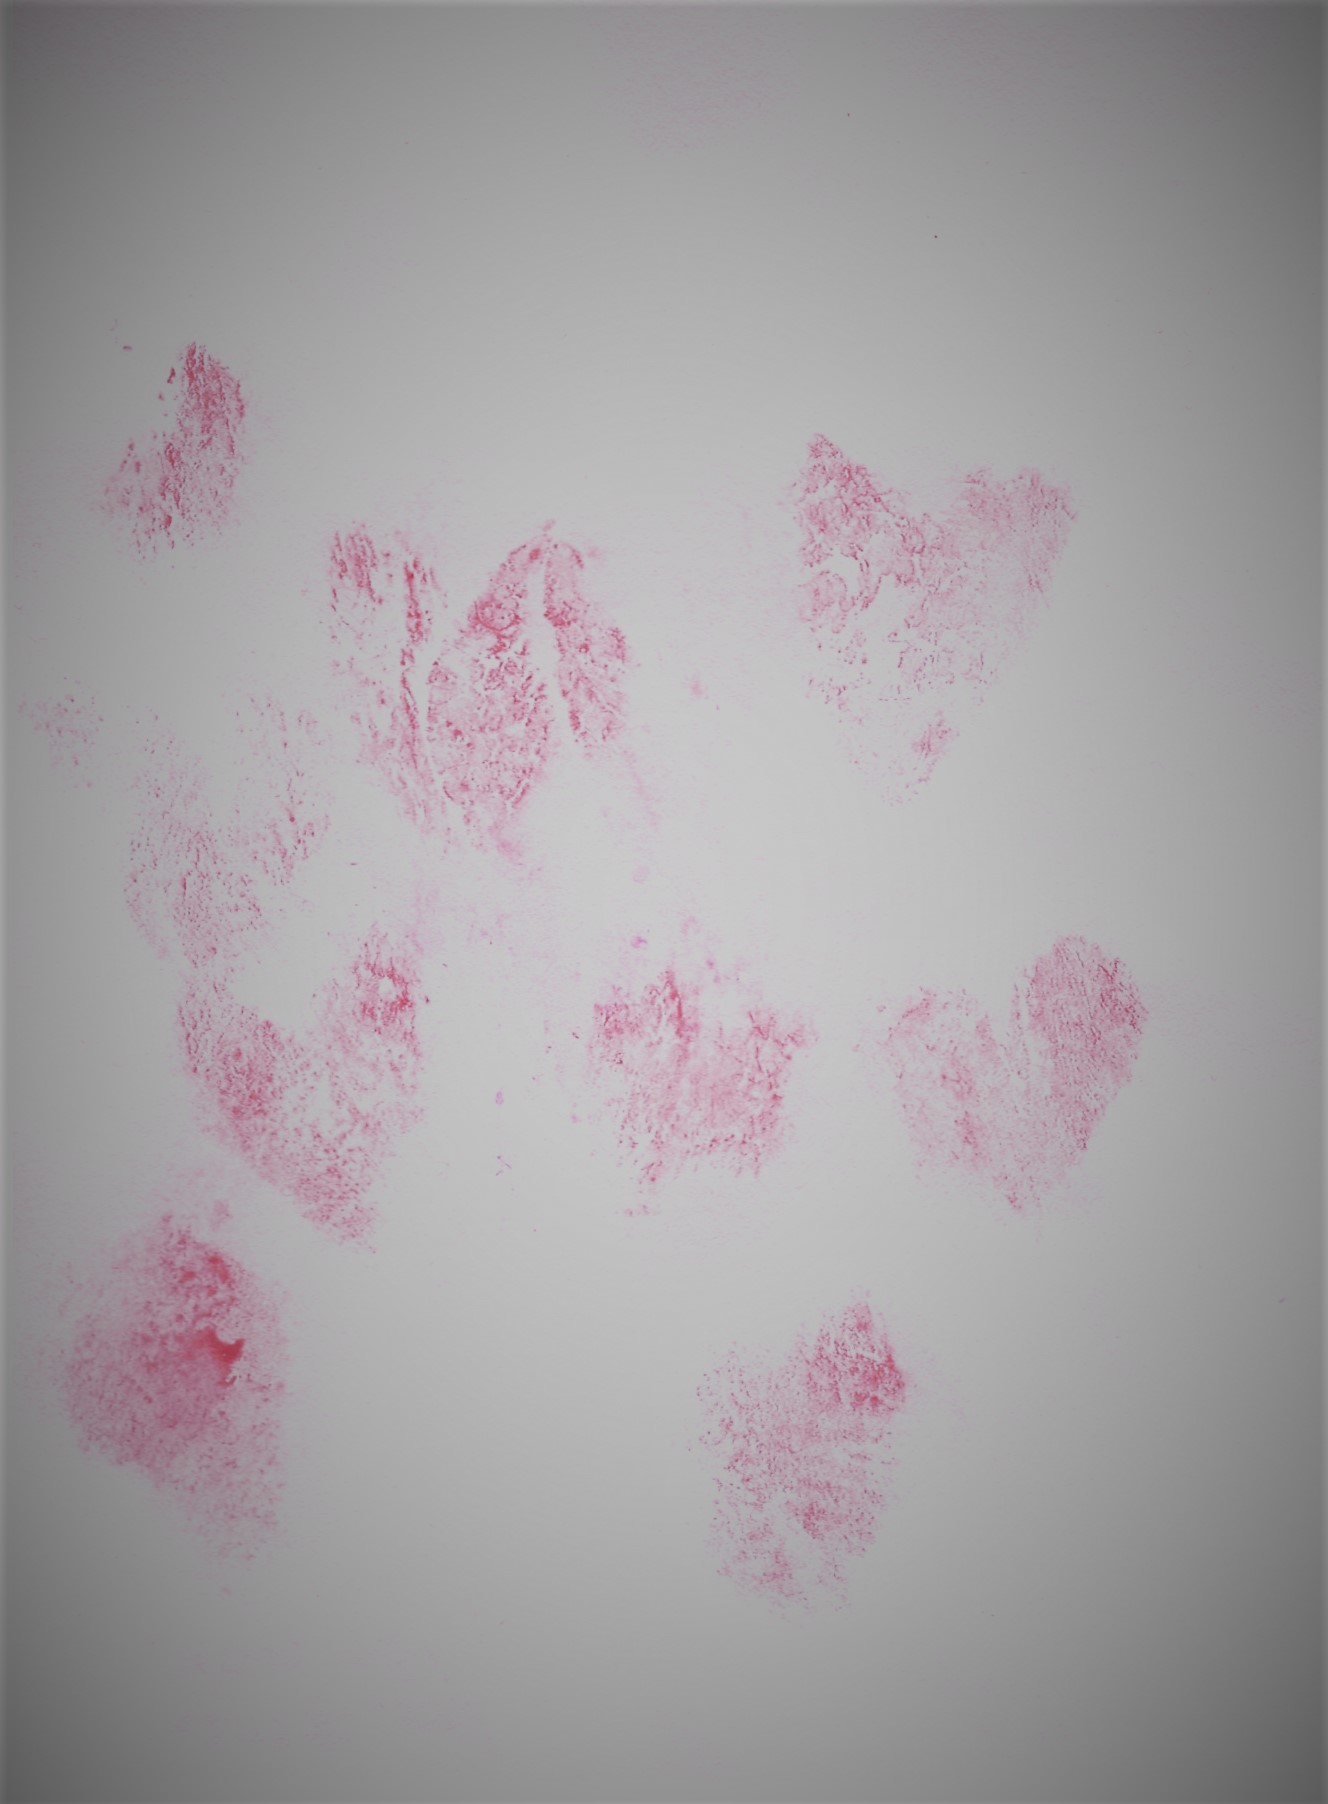 print of hearts painted on and around labia